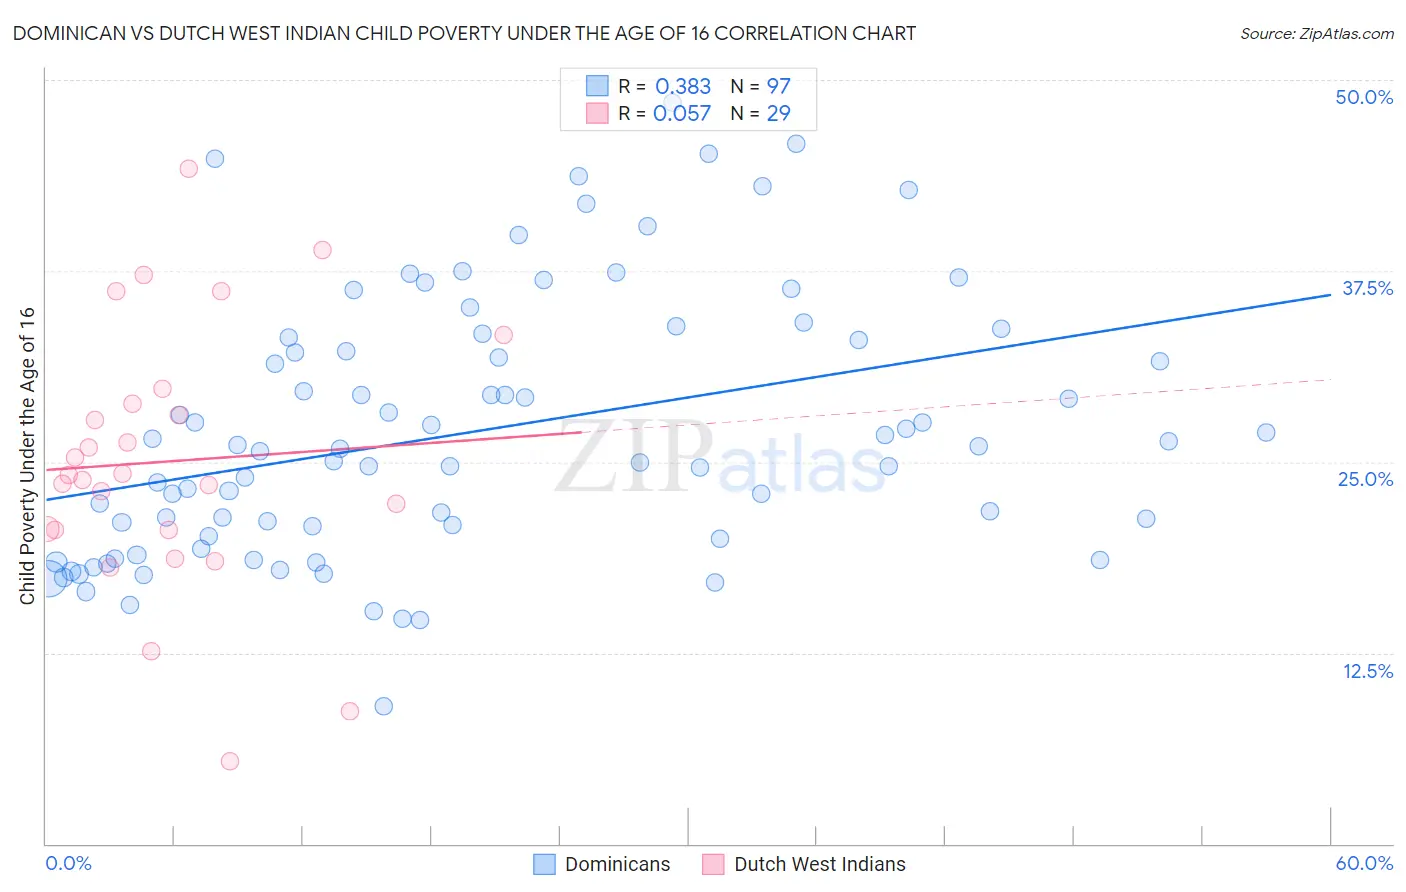 Dominican vs Dutch West Indian Child Poverty Under the Age of 16